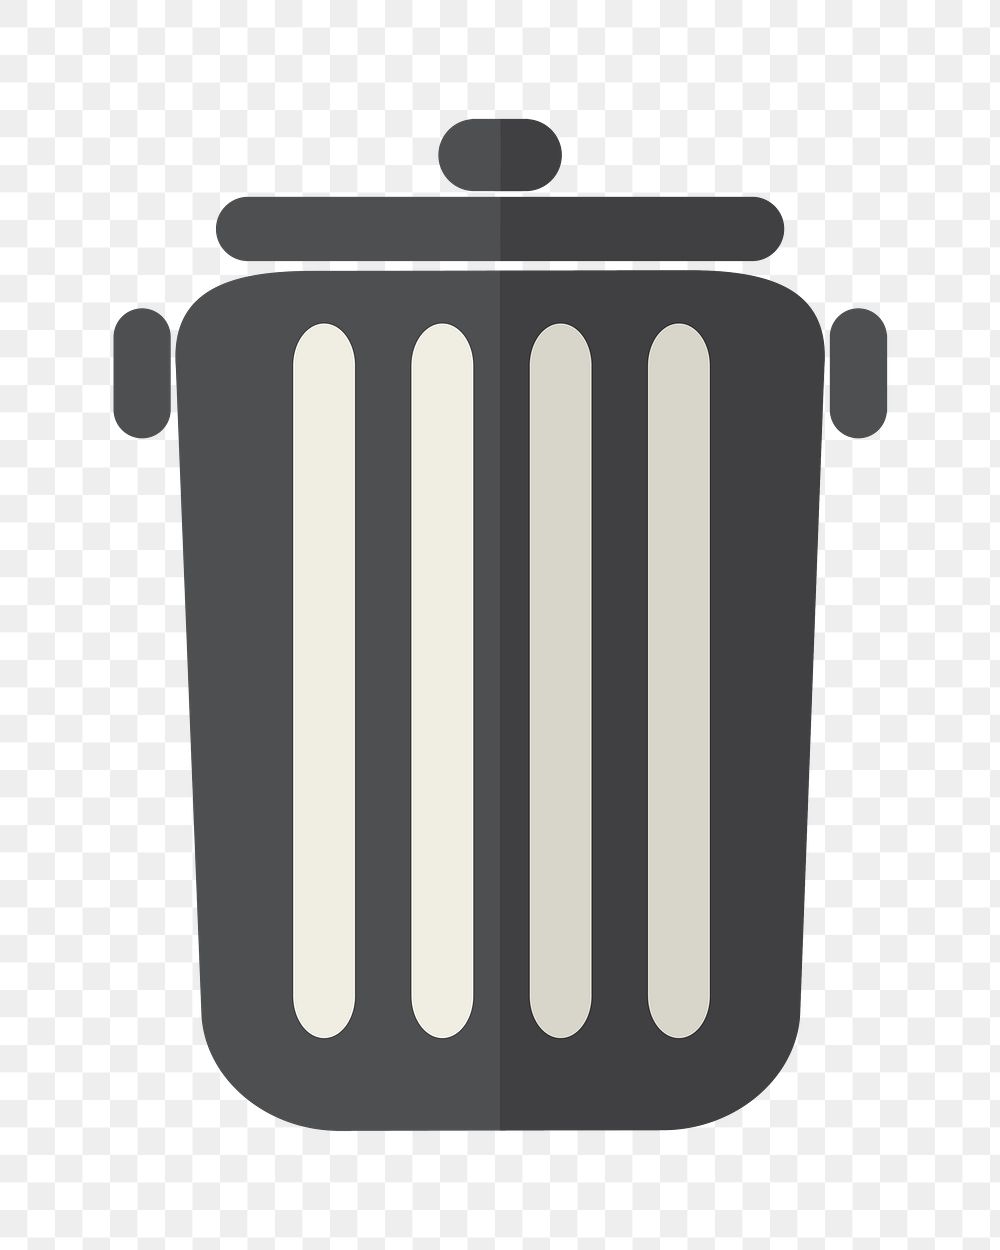 Trash can png icon, transparent background